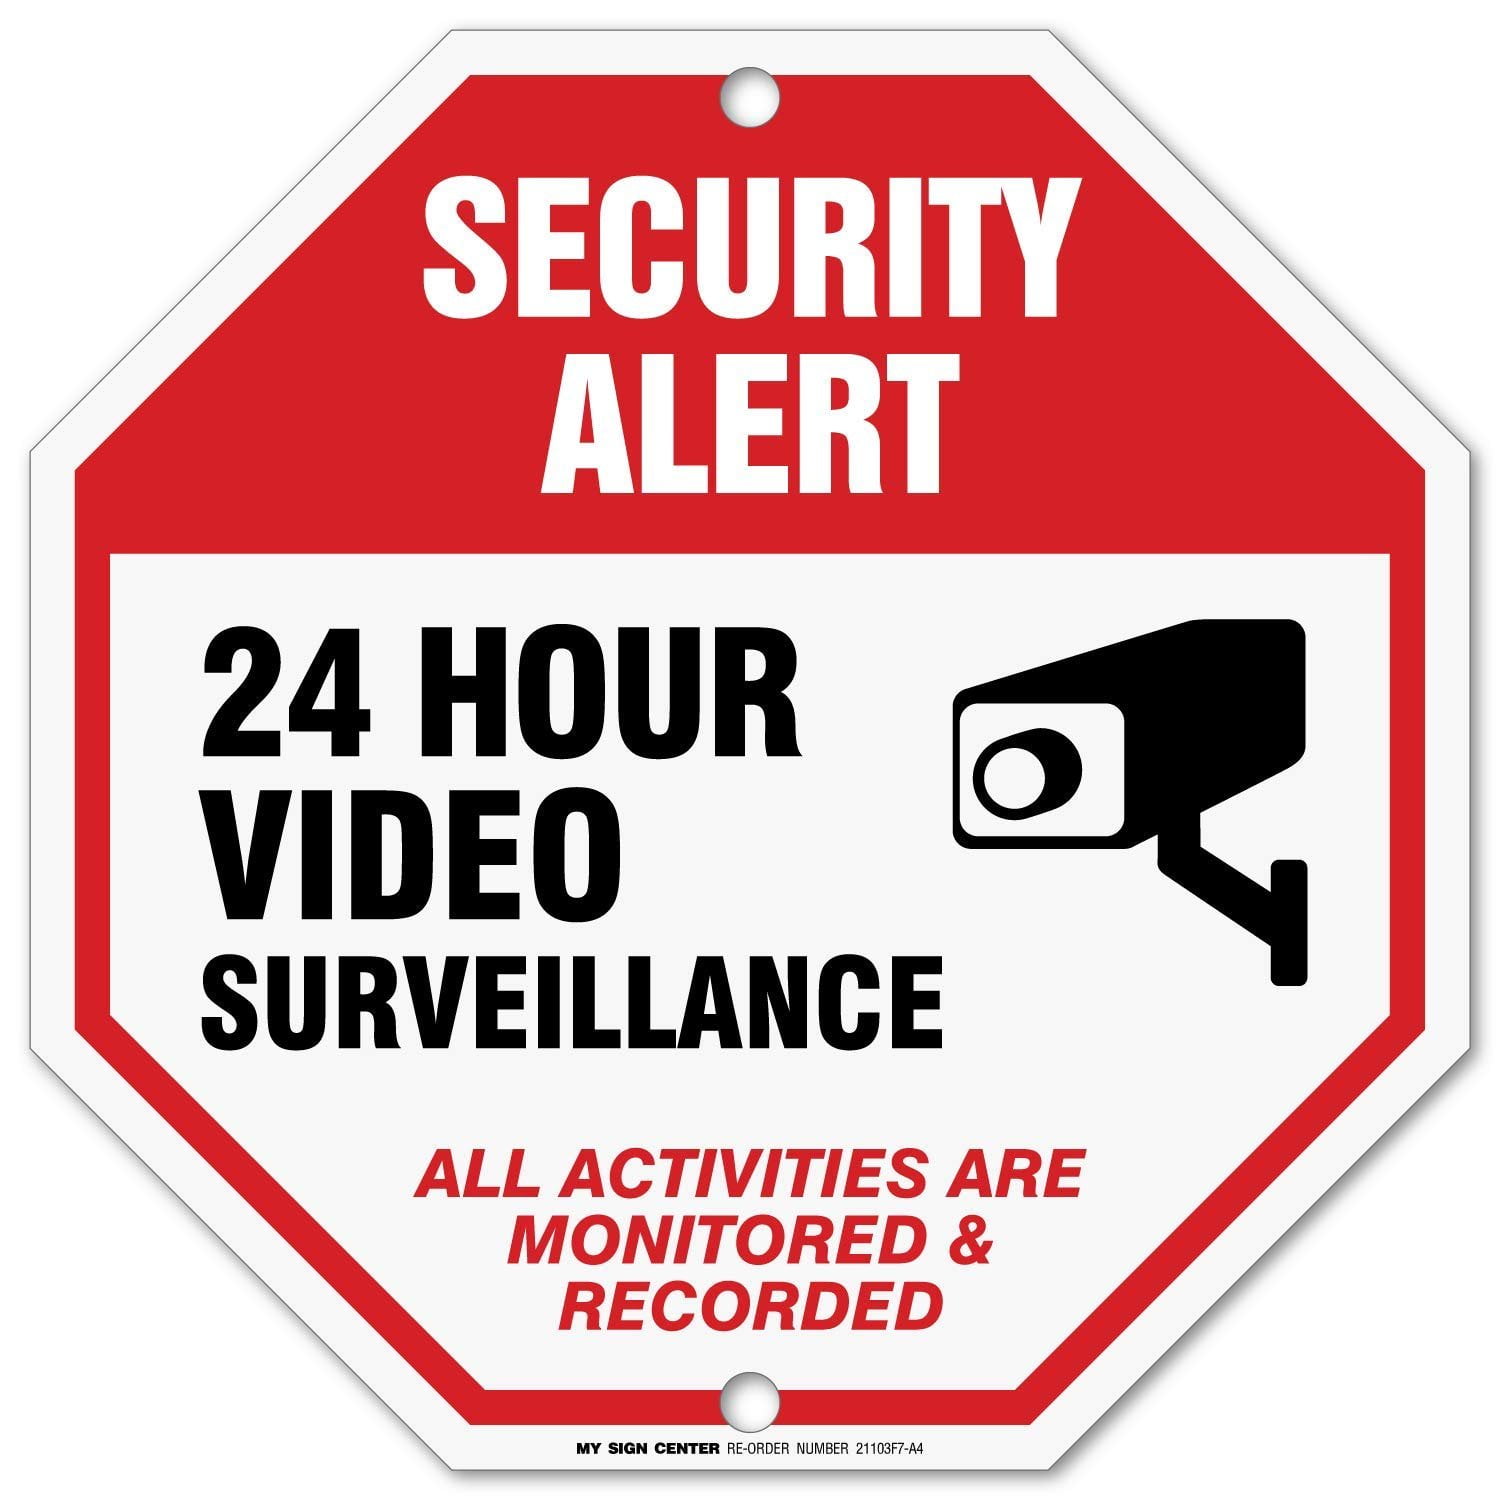 METAL HOME STORE SECURITY CAMERAS WARNING SIGNS+SMILE YOUR ON VIDEO STICKER LOT 